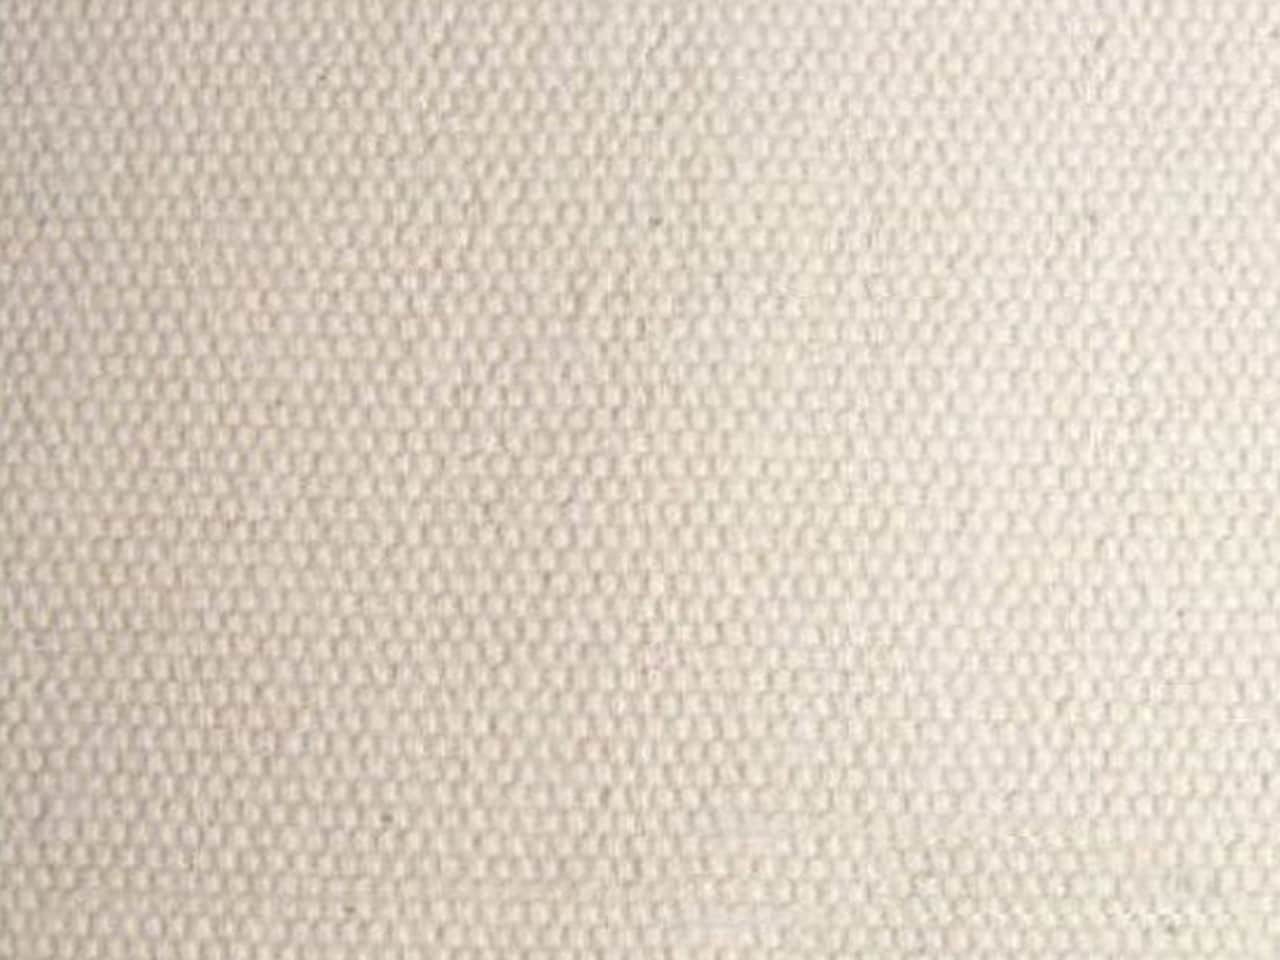 Cotton organic DUCK CANVAS fabric by the yards,, 60  width, weight 10 oz  ,upholstery fabric